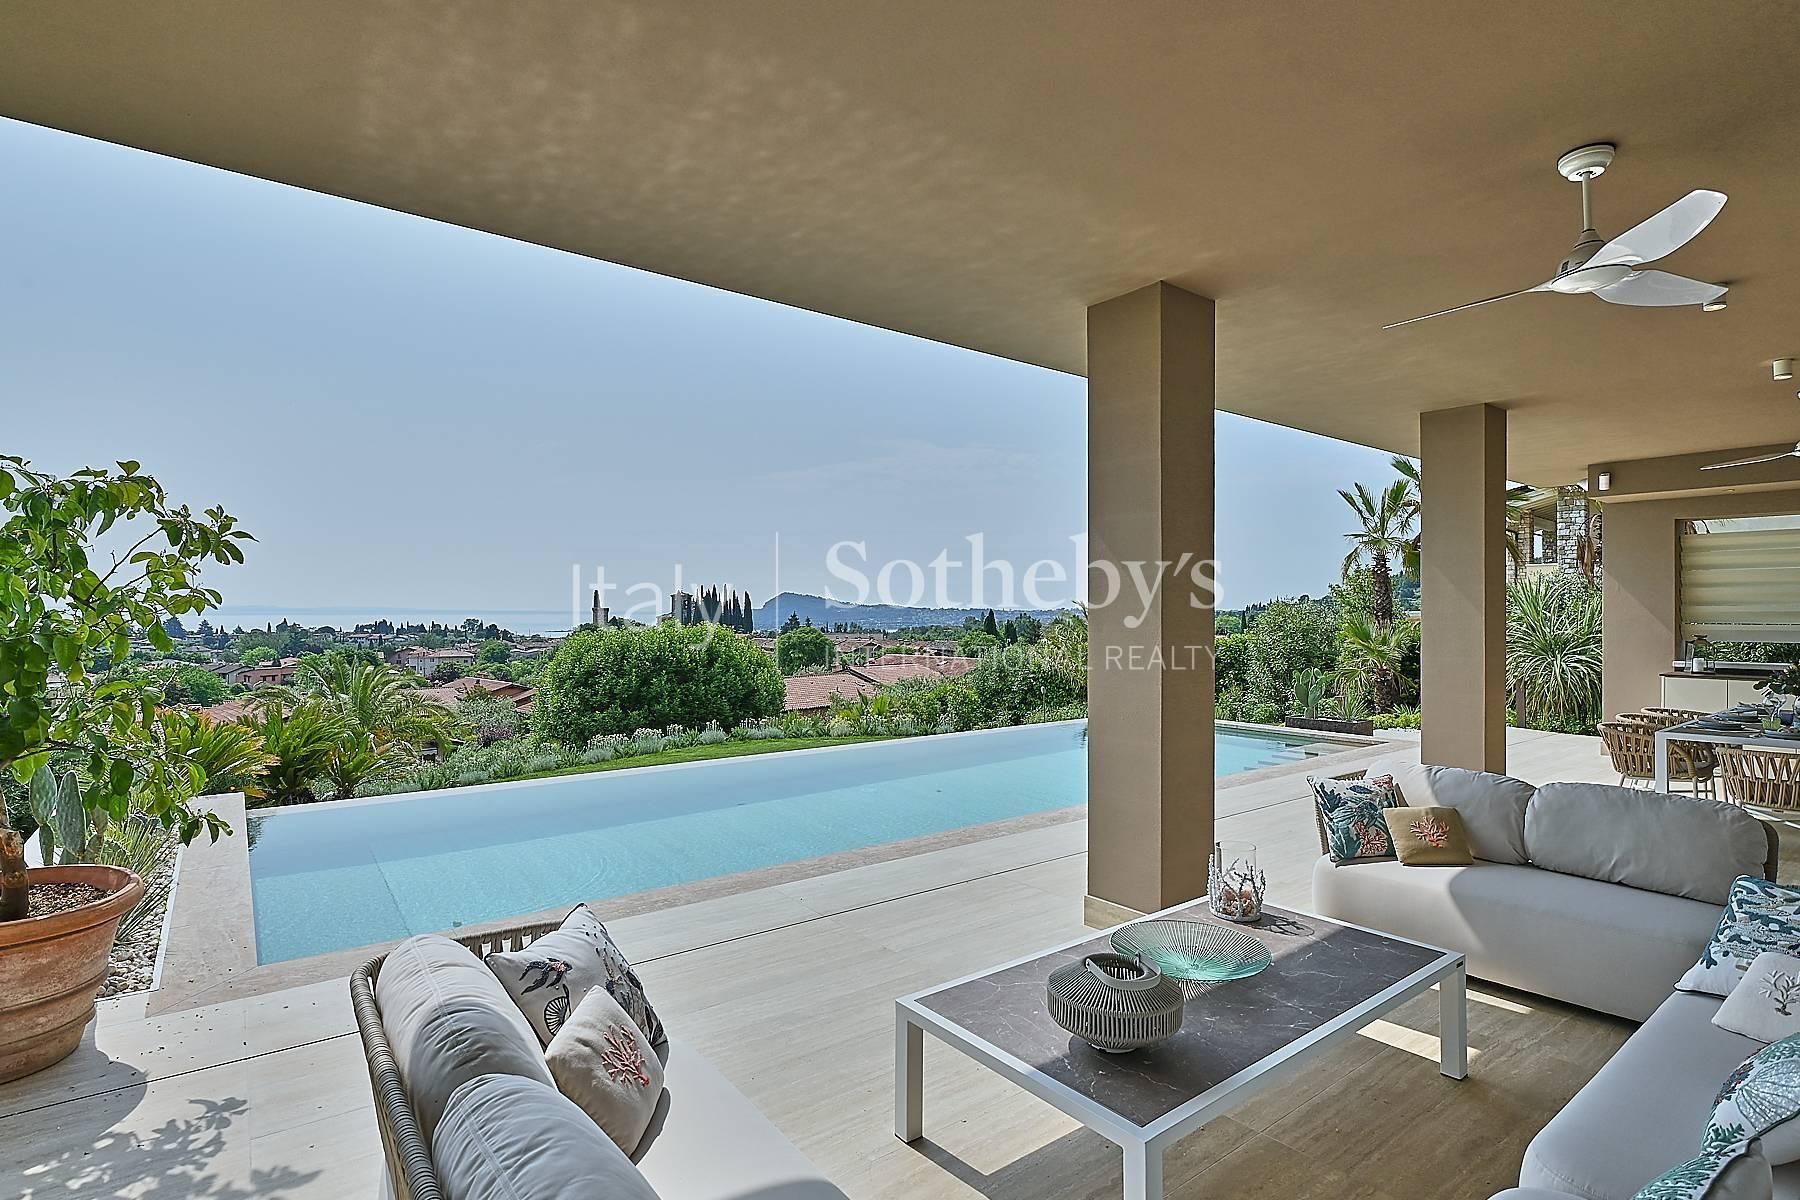 Exclusive Villa with lake view, infinity pool, SPA and fitness area - 6